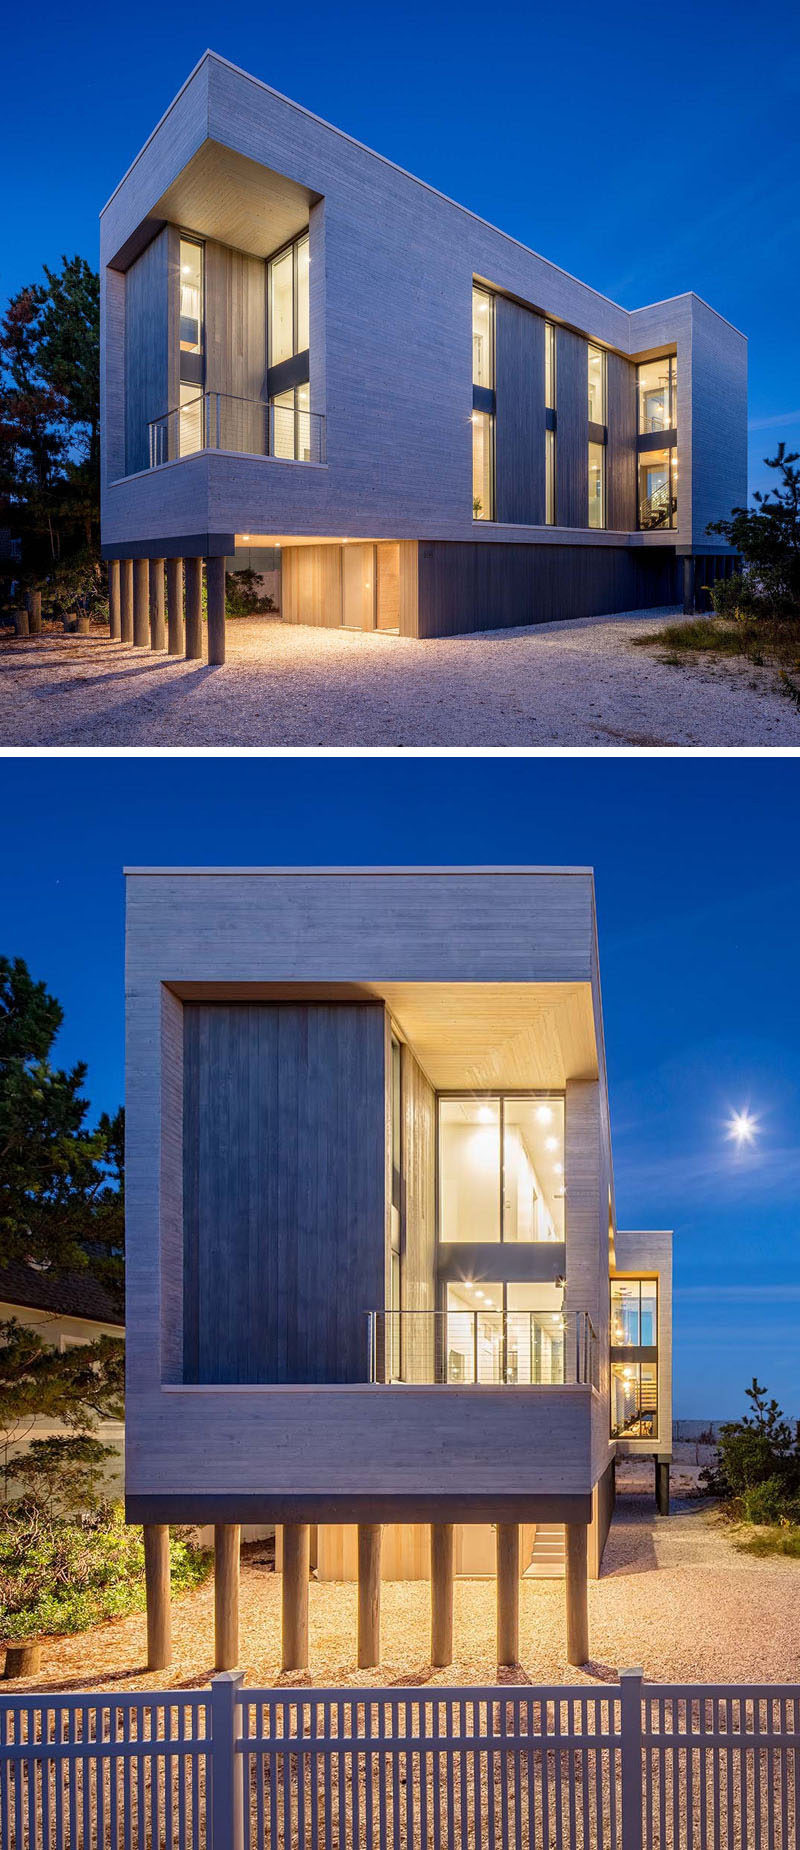 At night this modern beach house is lit up like a lantern with vertical windows allowing the light to shine through.